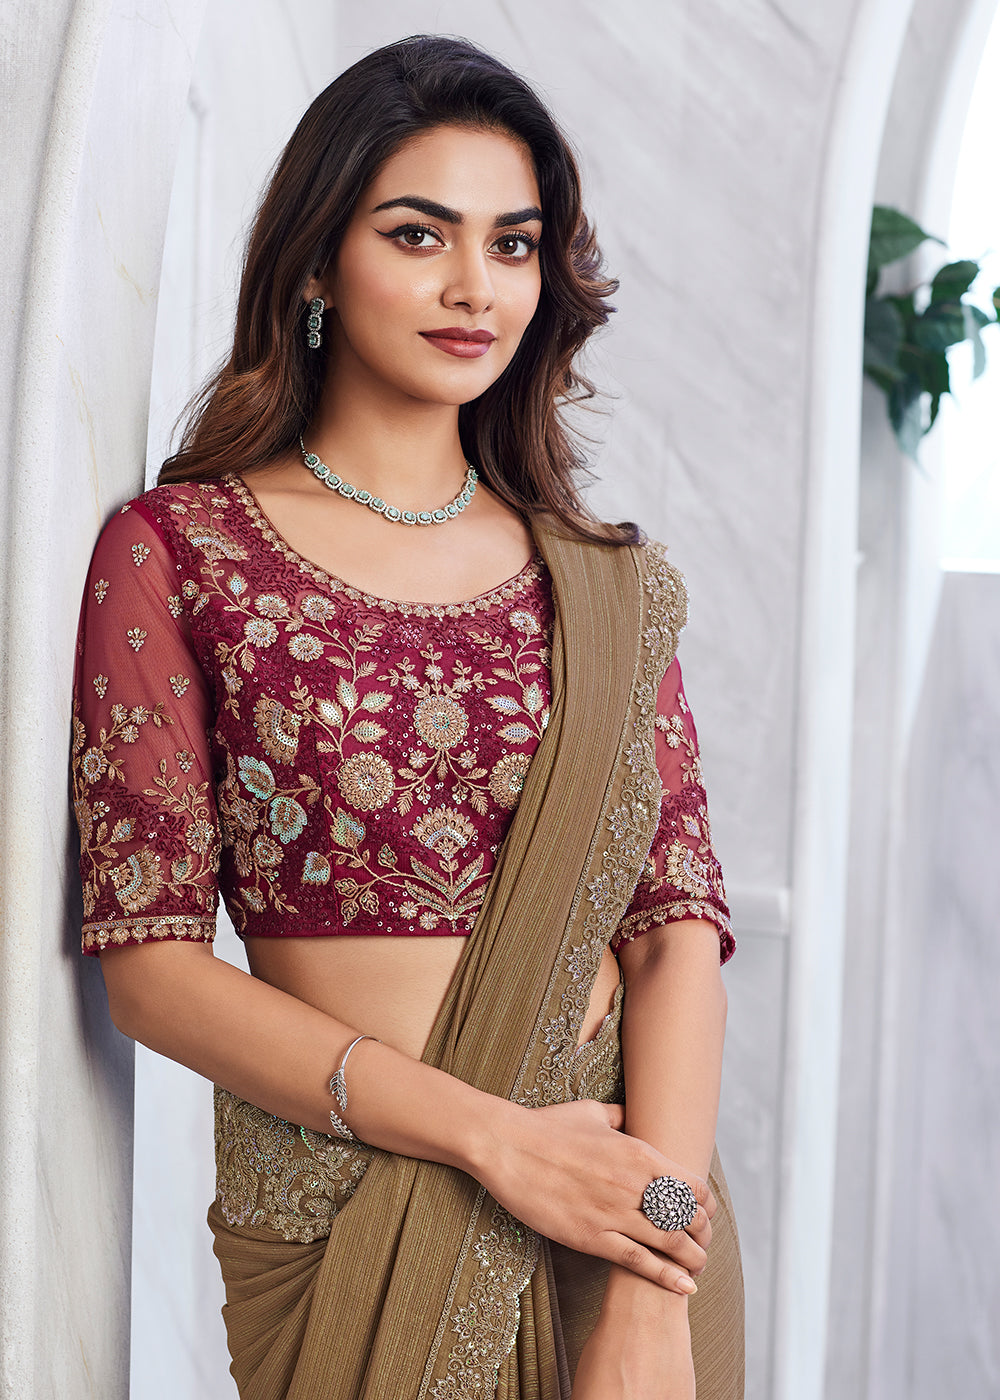 Buy Now Lovely Light Brown Silk Embroidered Designer Saree Online in USA, UK, Canada & Worldwide at Empress Clothing.